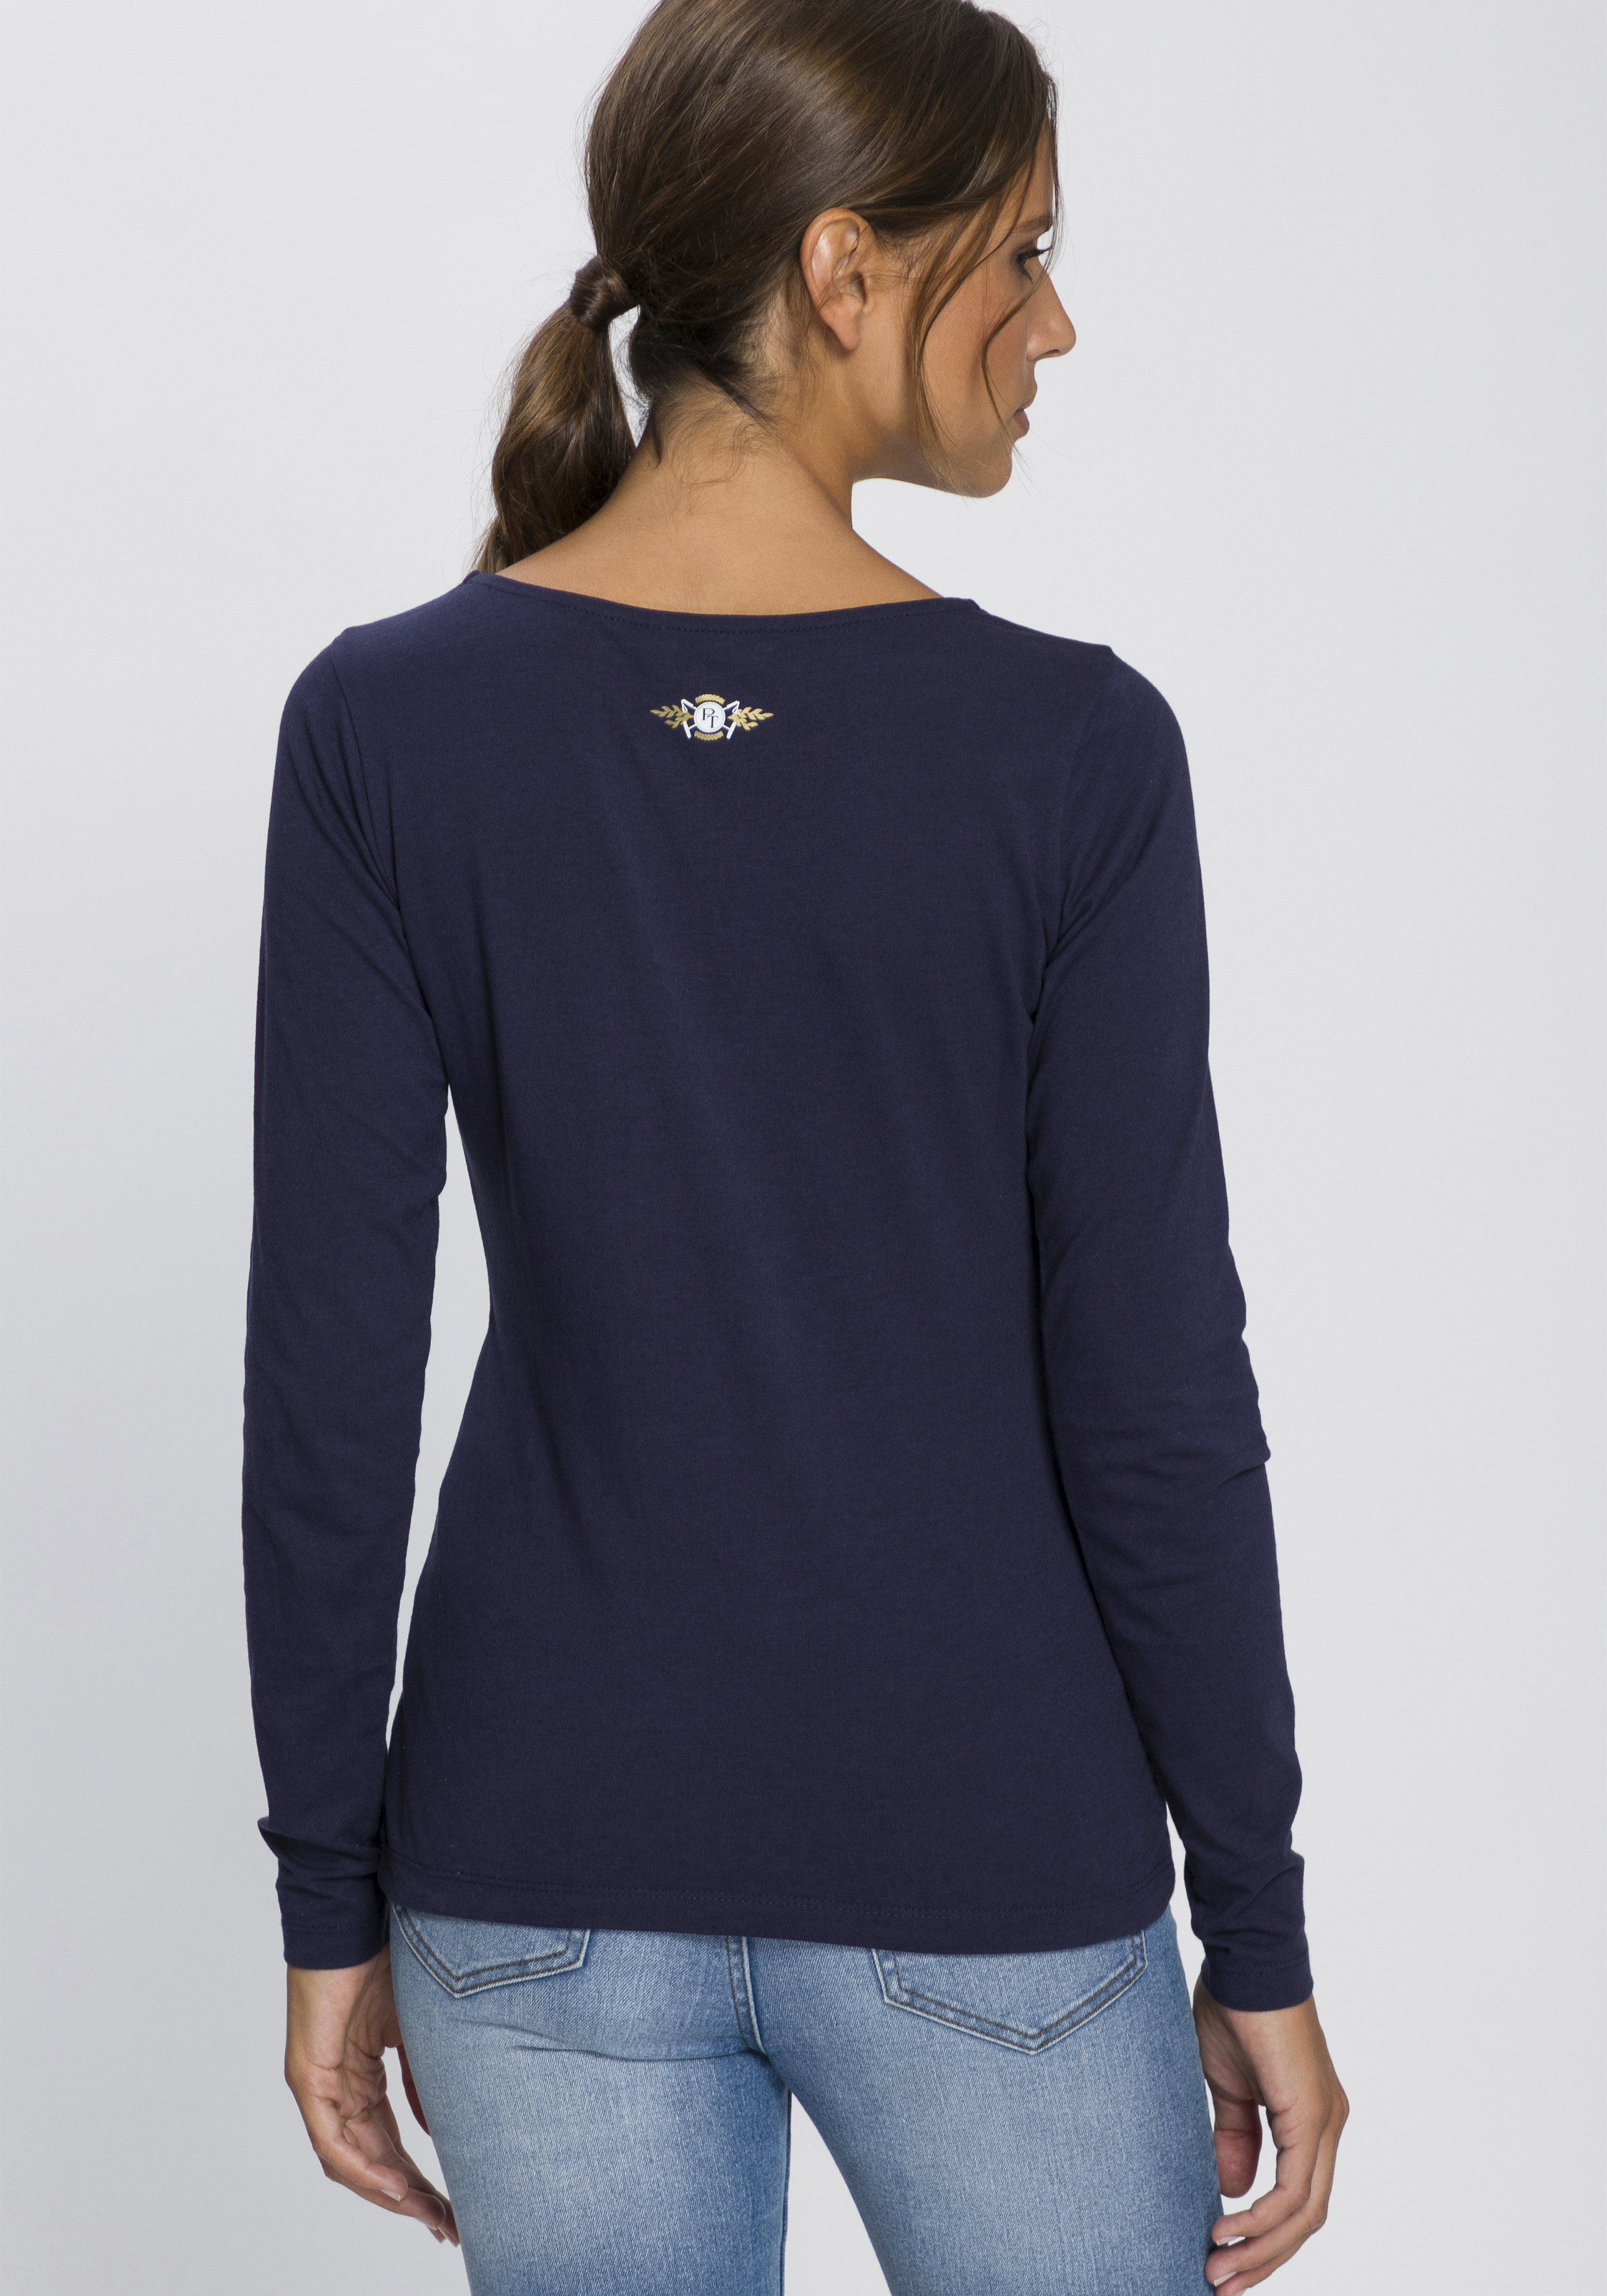 Tom Tailor Polo Team Shirt in Navy 